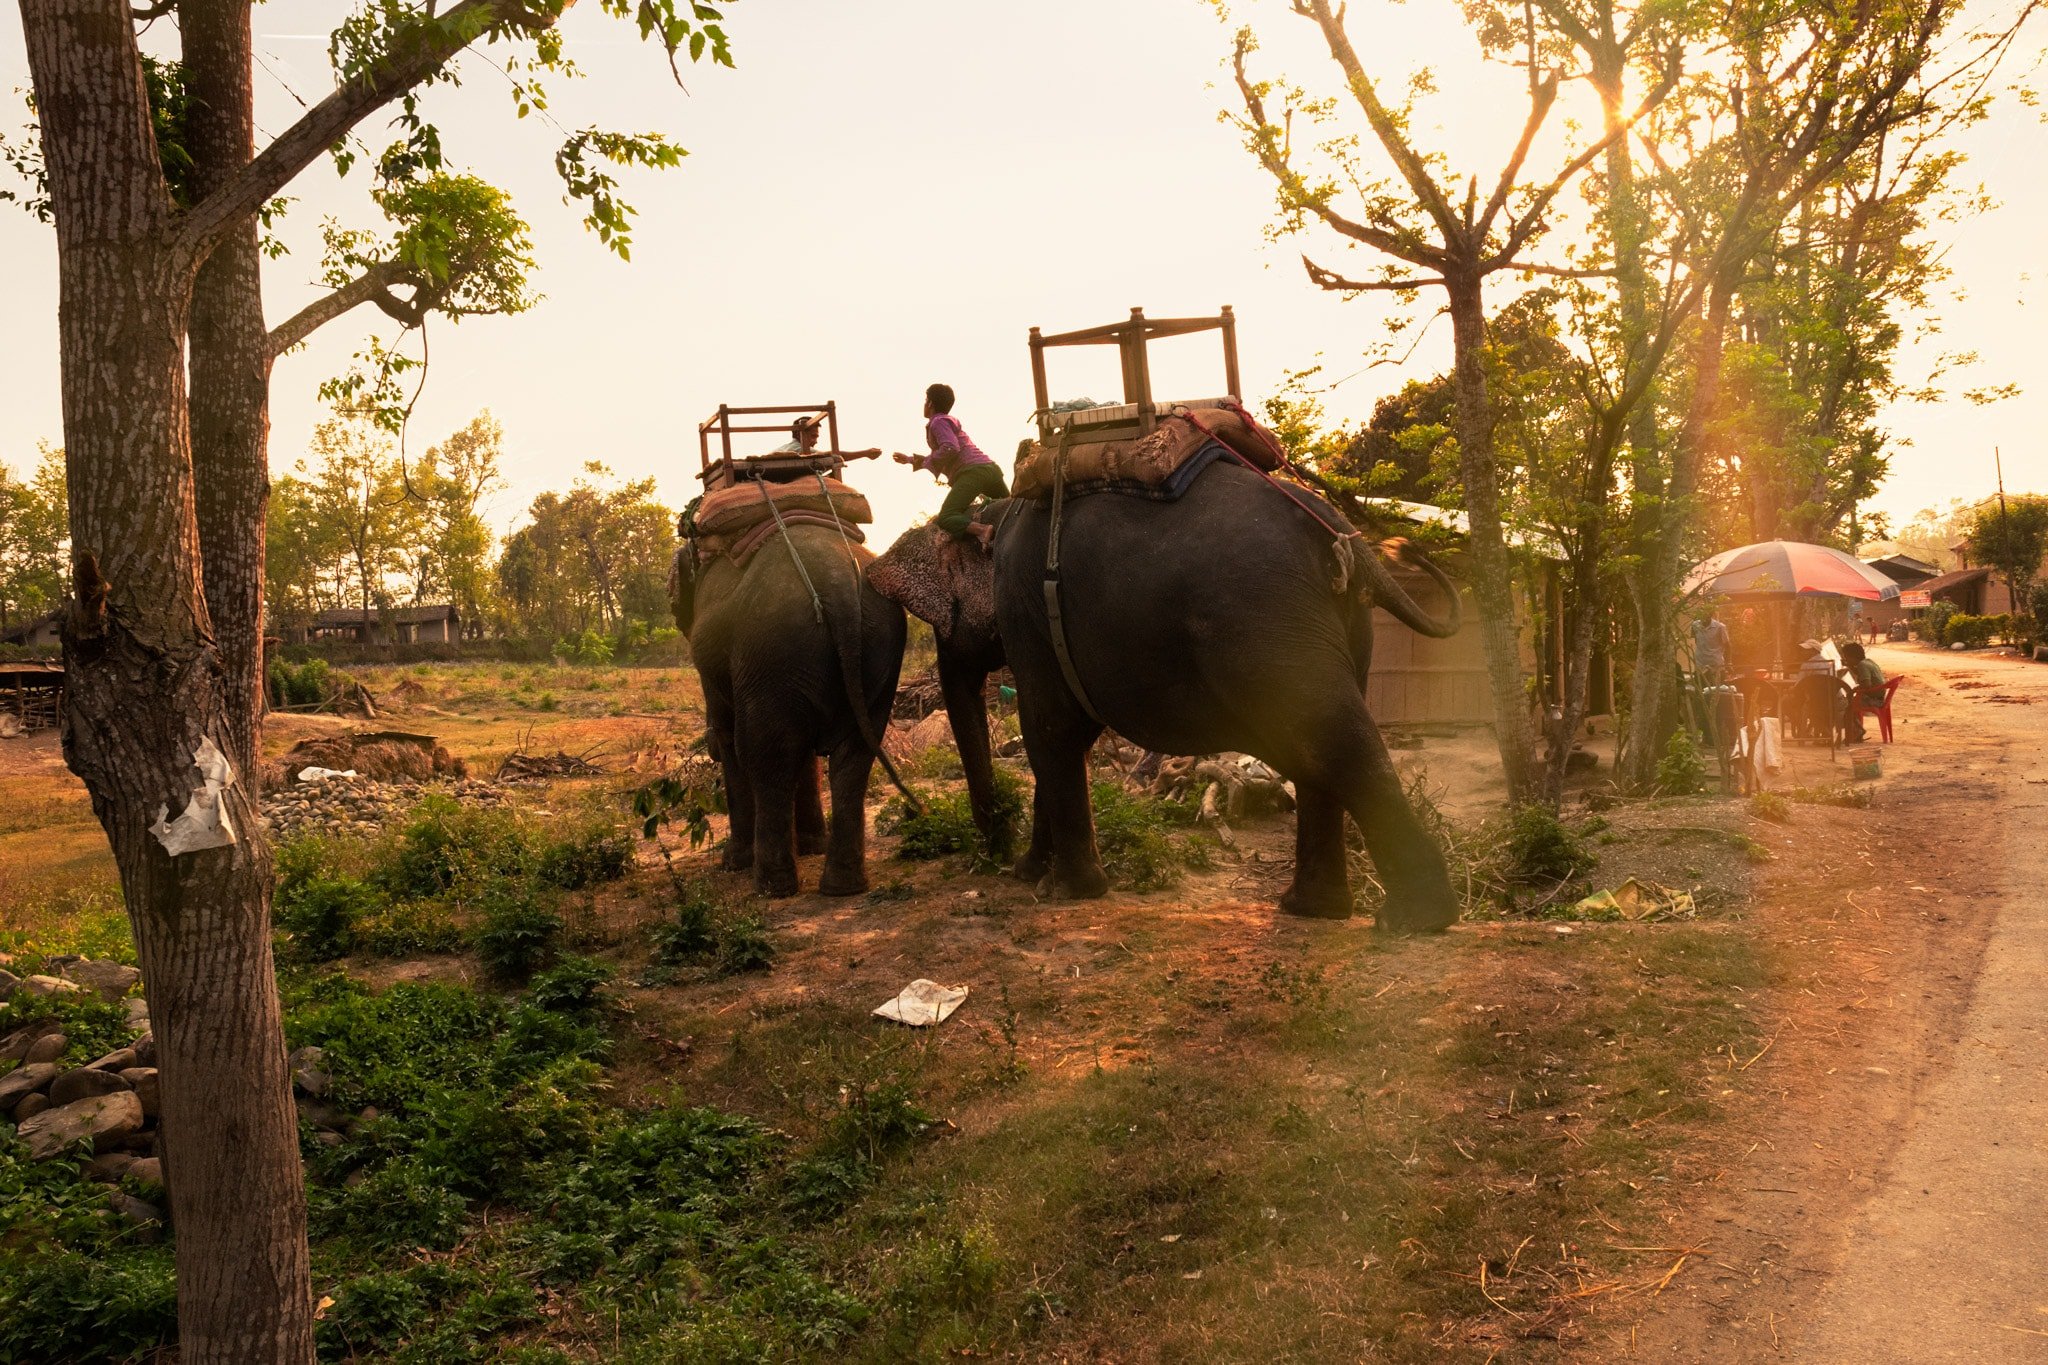 Elephants come back to Tharu village after a long day of work carrying tourists around the Chitwan National Park, Nepal.